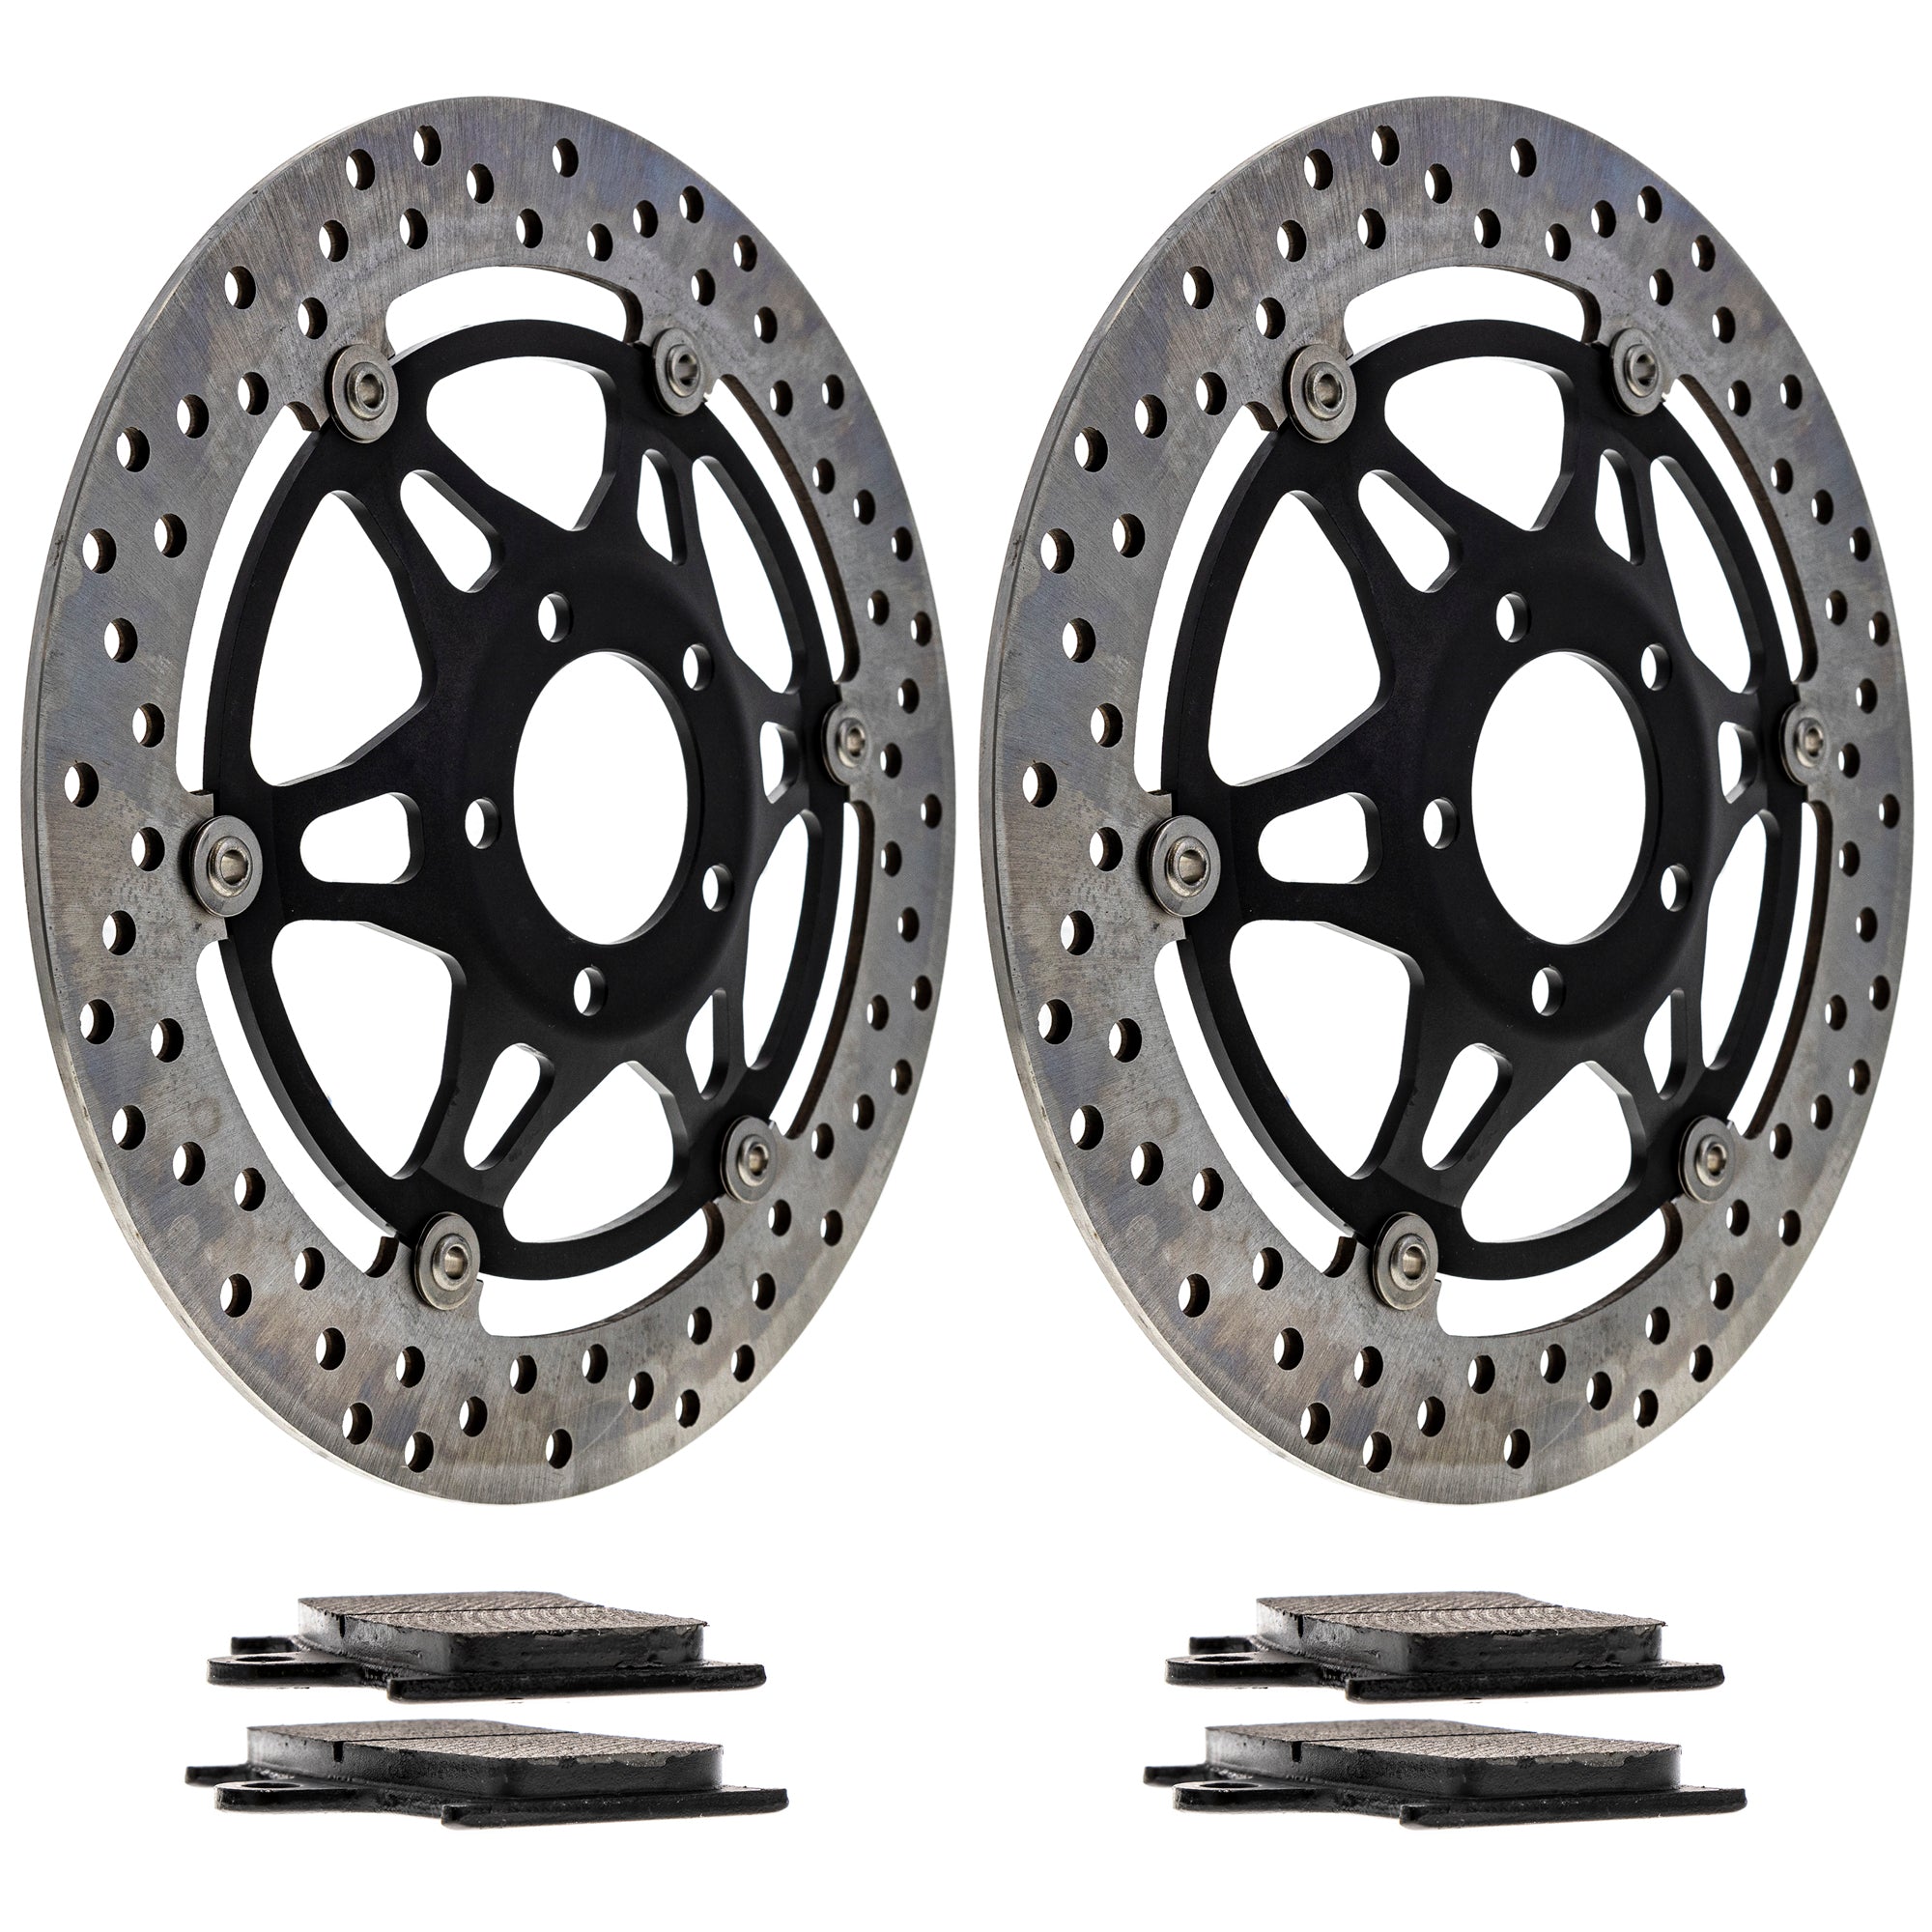 Front Brake Rotors and Pads Kit for zOTHER Victory Triumph KTM Harley Davidson Ducati BMW NICHE MK1007181